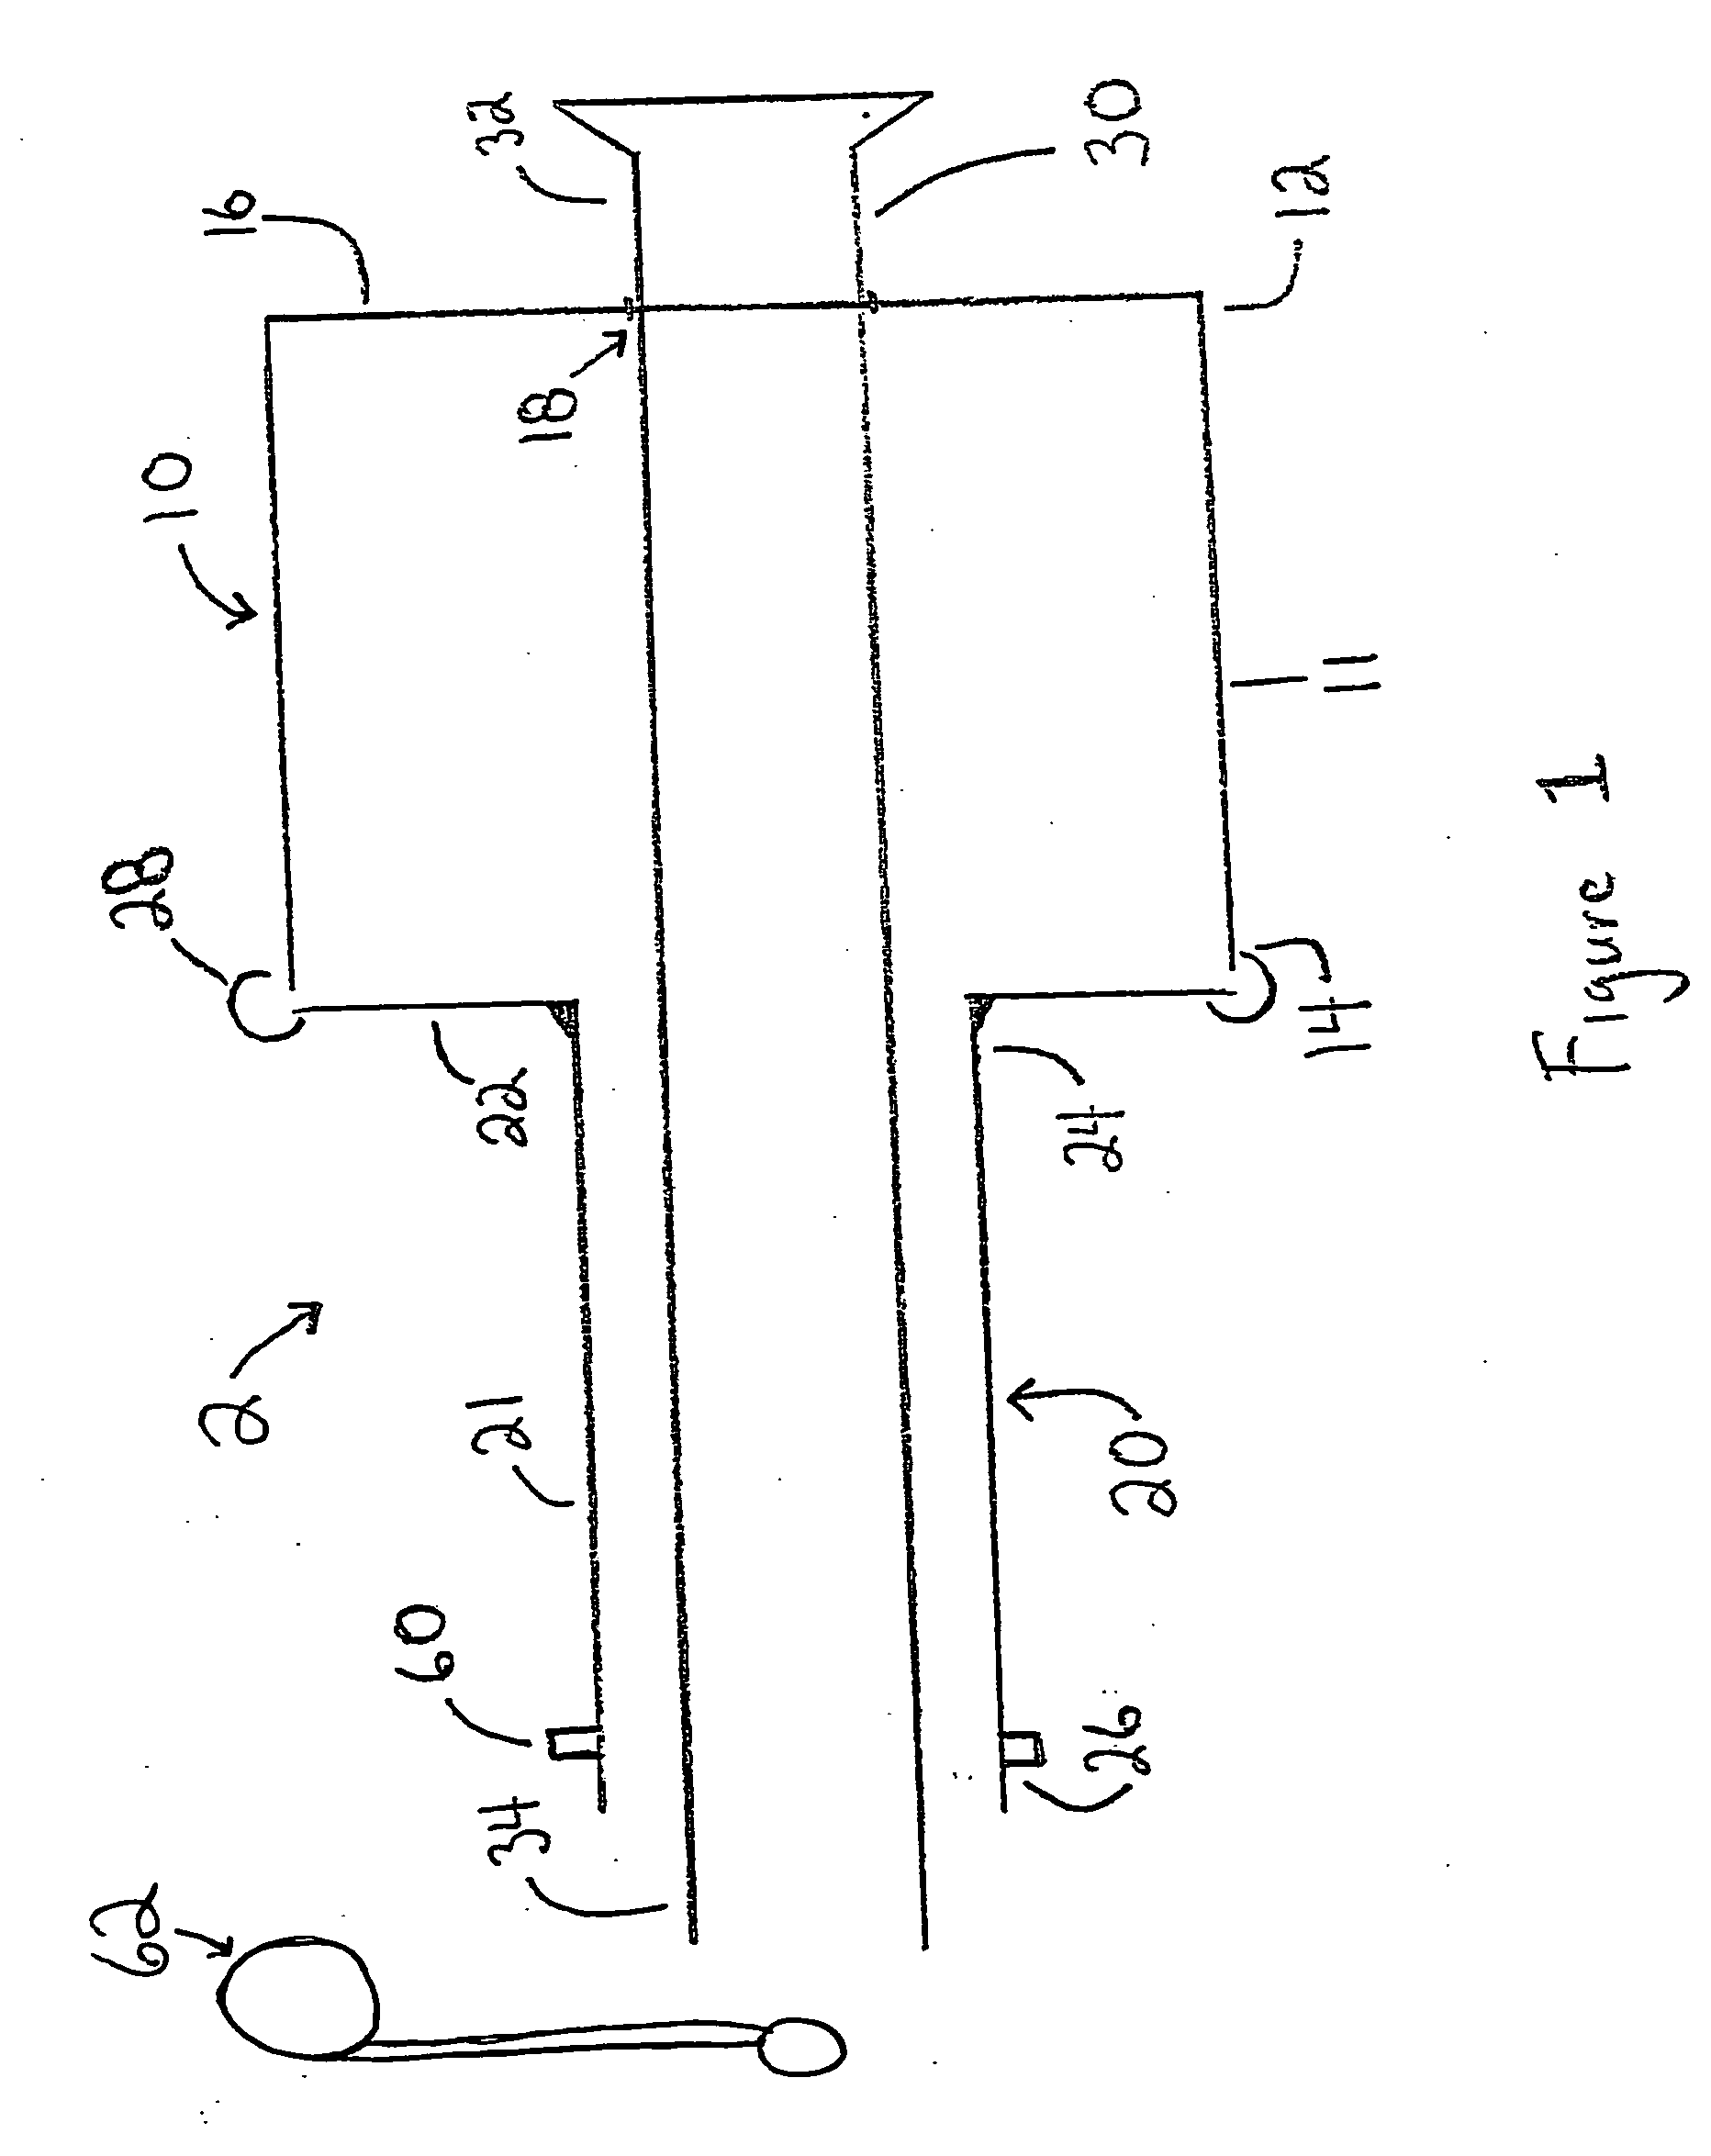 Apparatus and method to net food products in shirred tubular casing